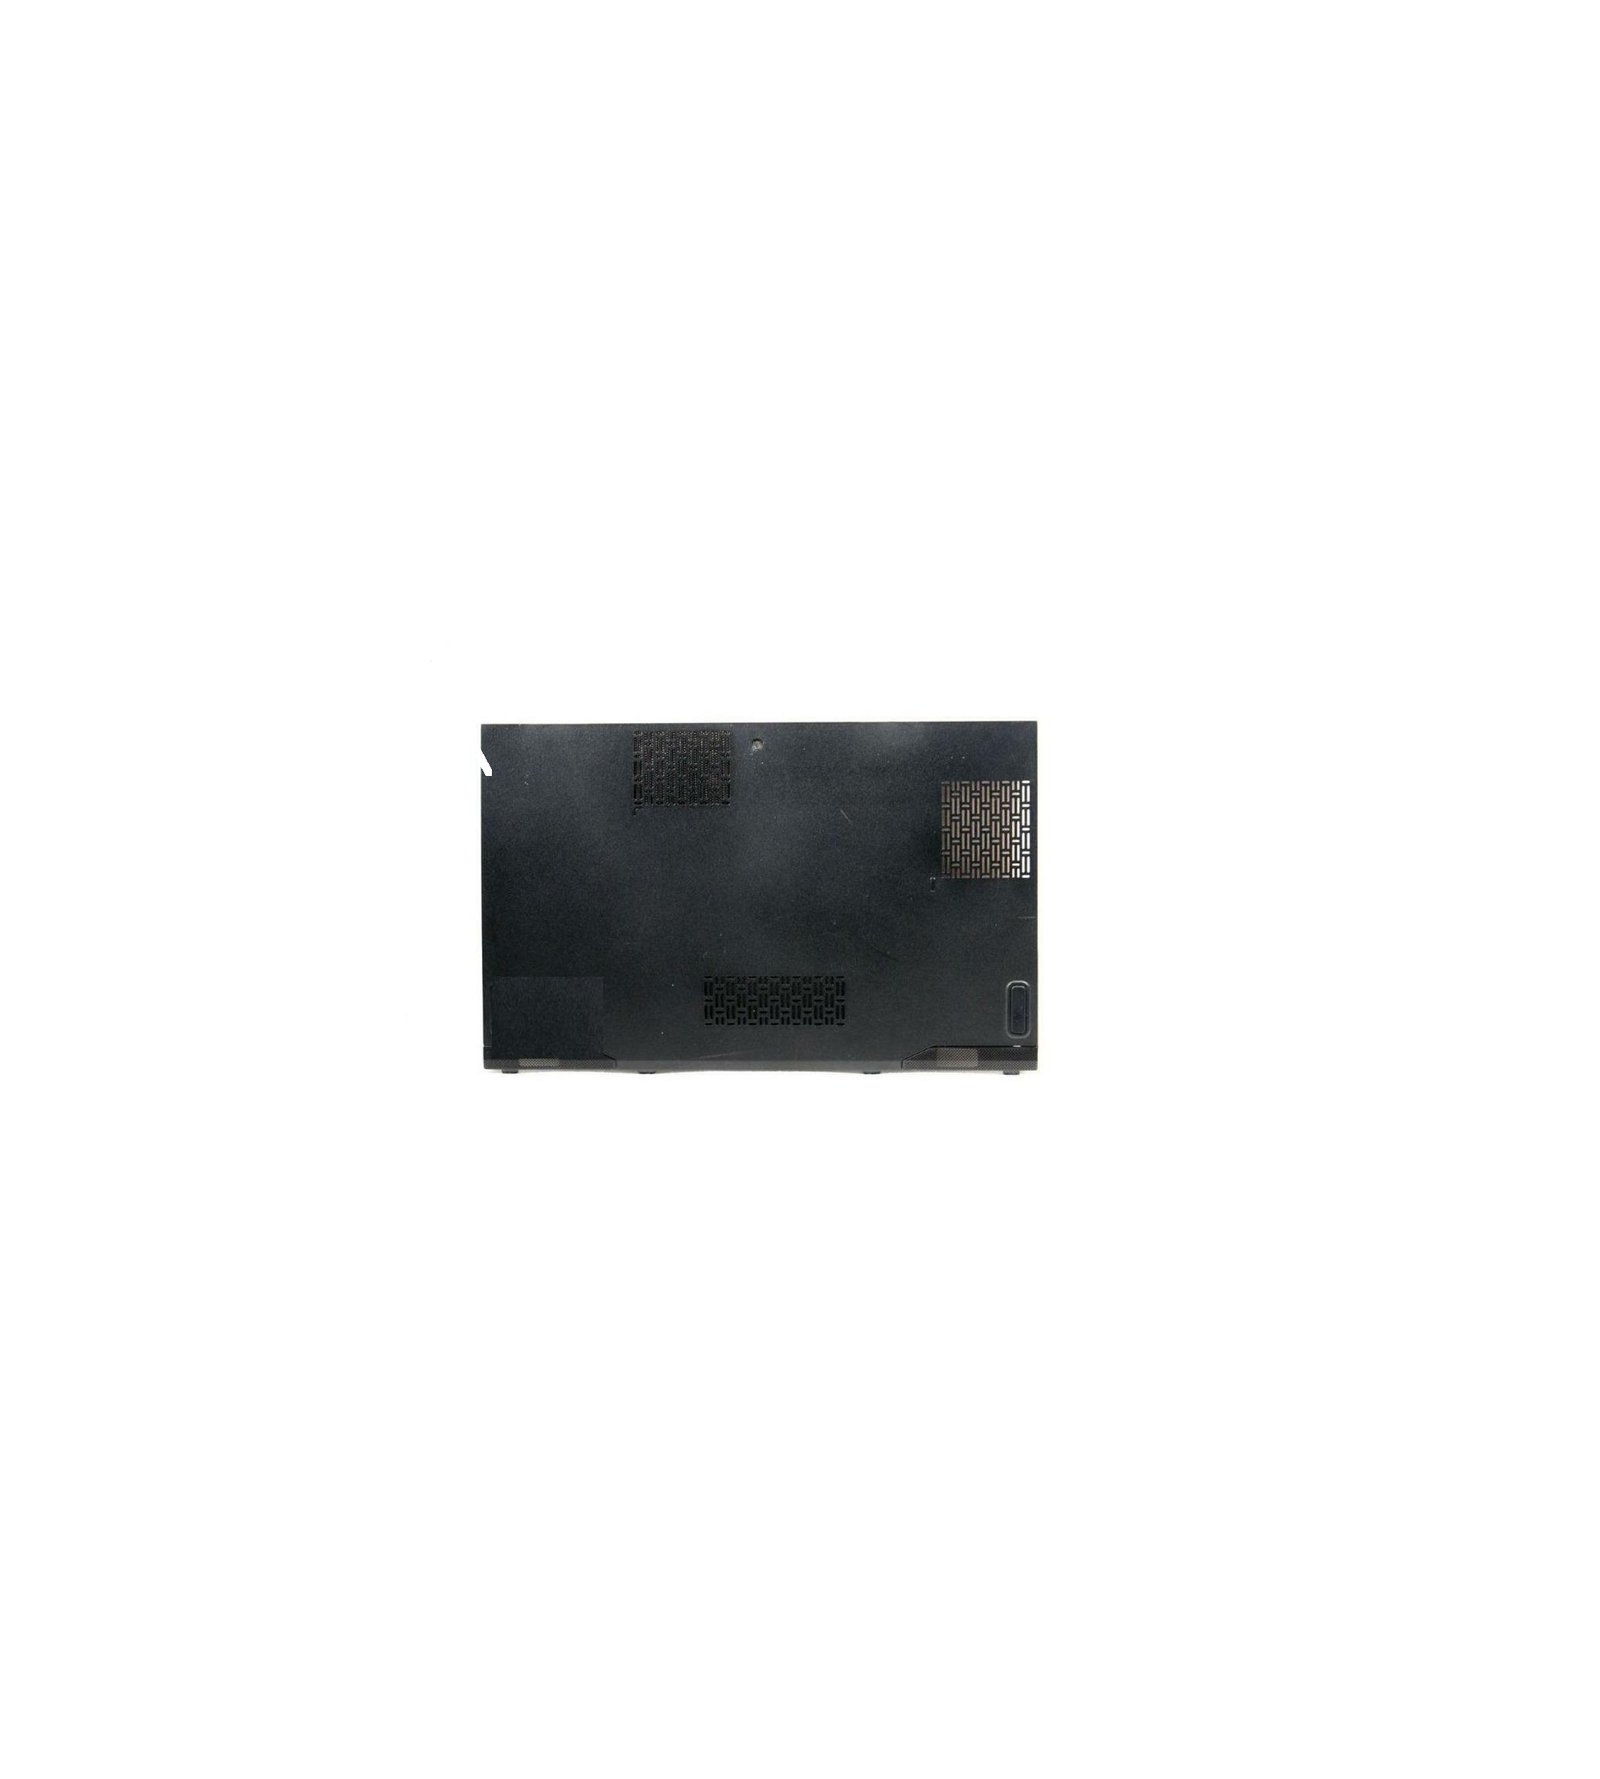 Dell Vostro 3460 OEM Bottom Access Panel Door Cover P/N XRMF7, 0XRMF7